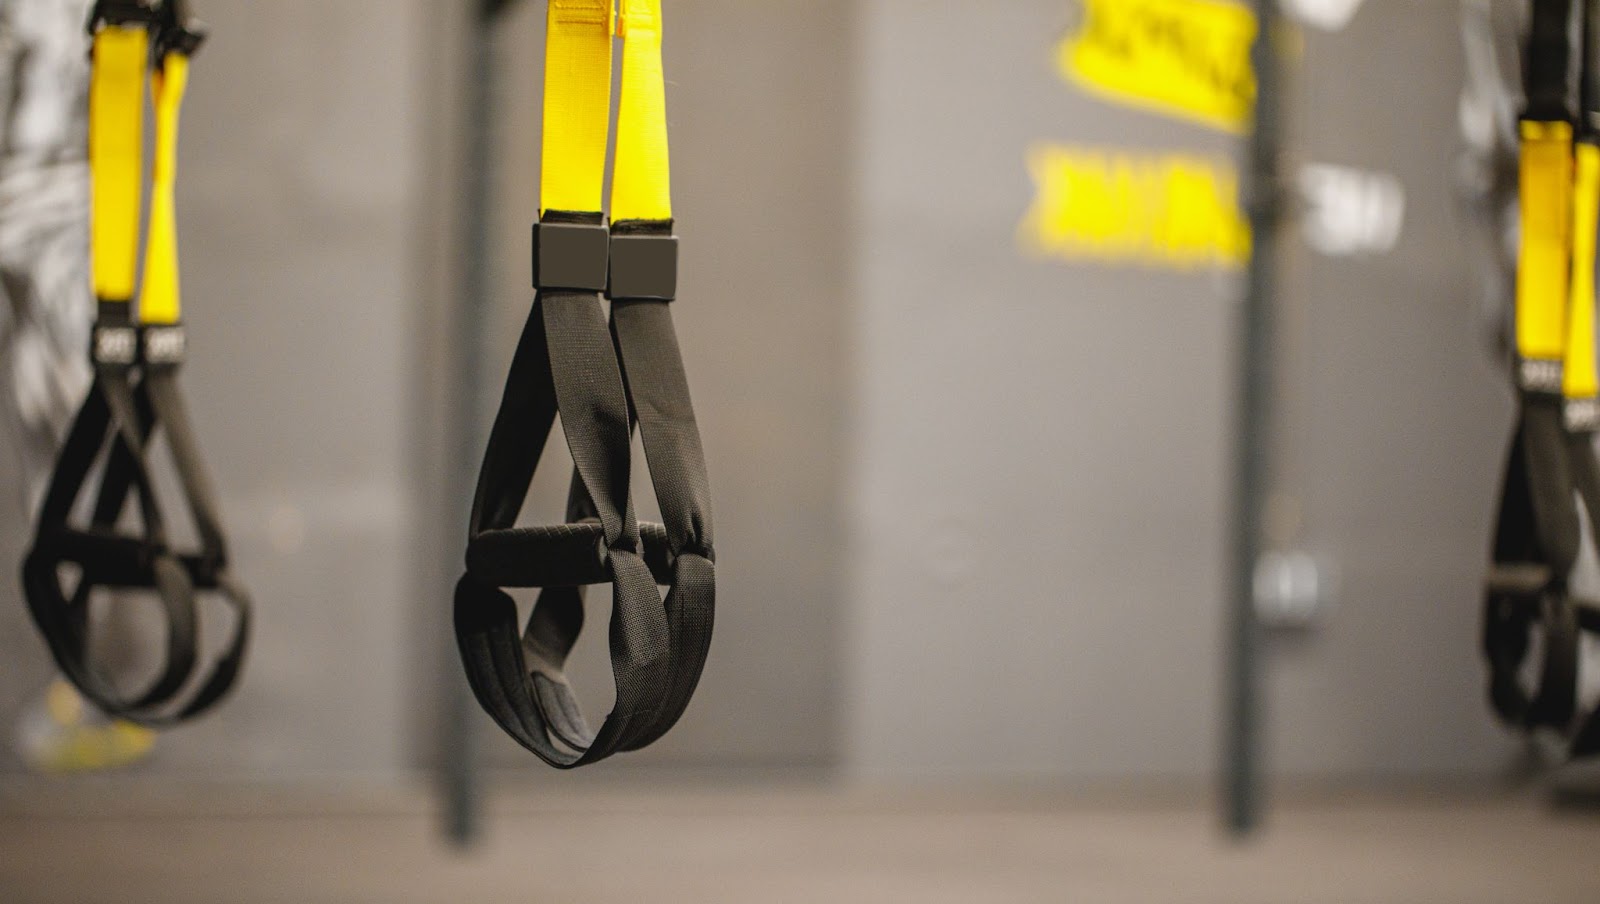 3 pairs of hanging TRX suspension straps in a gray gym